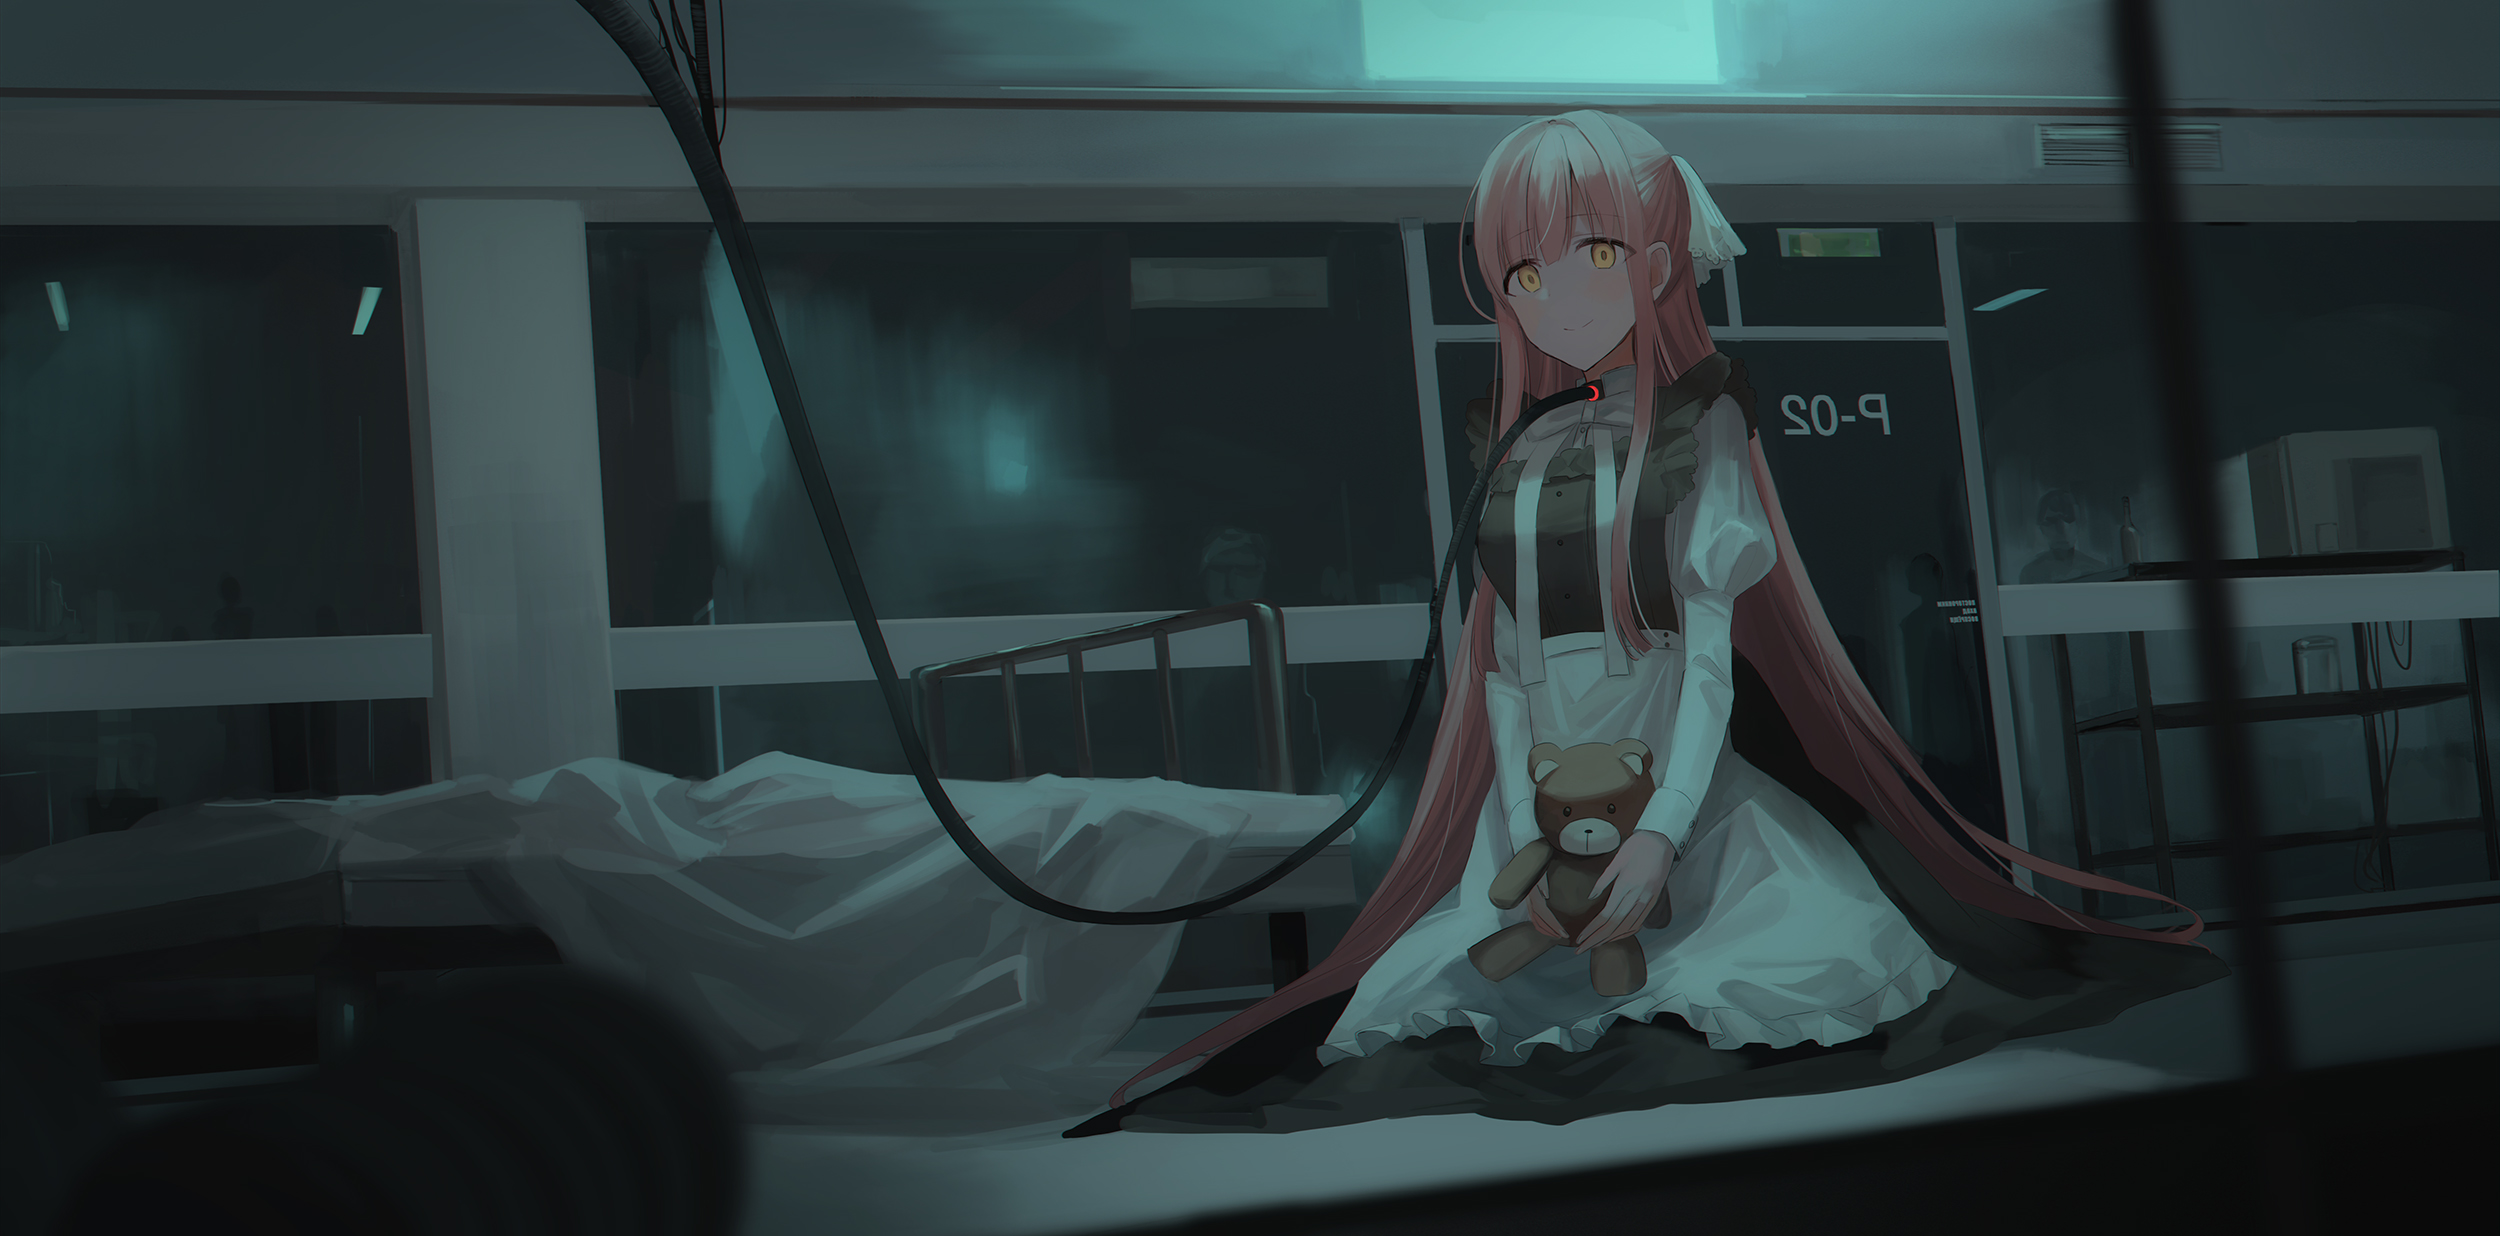 Anime Girls Original Characters Pink Hair Long Hair Yellow Eyes Maid Dress Apron On The Floor Bed La 2500x1236